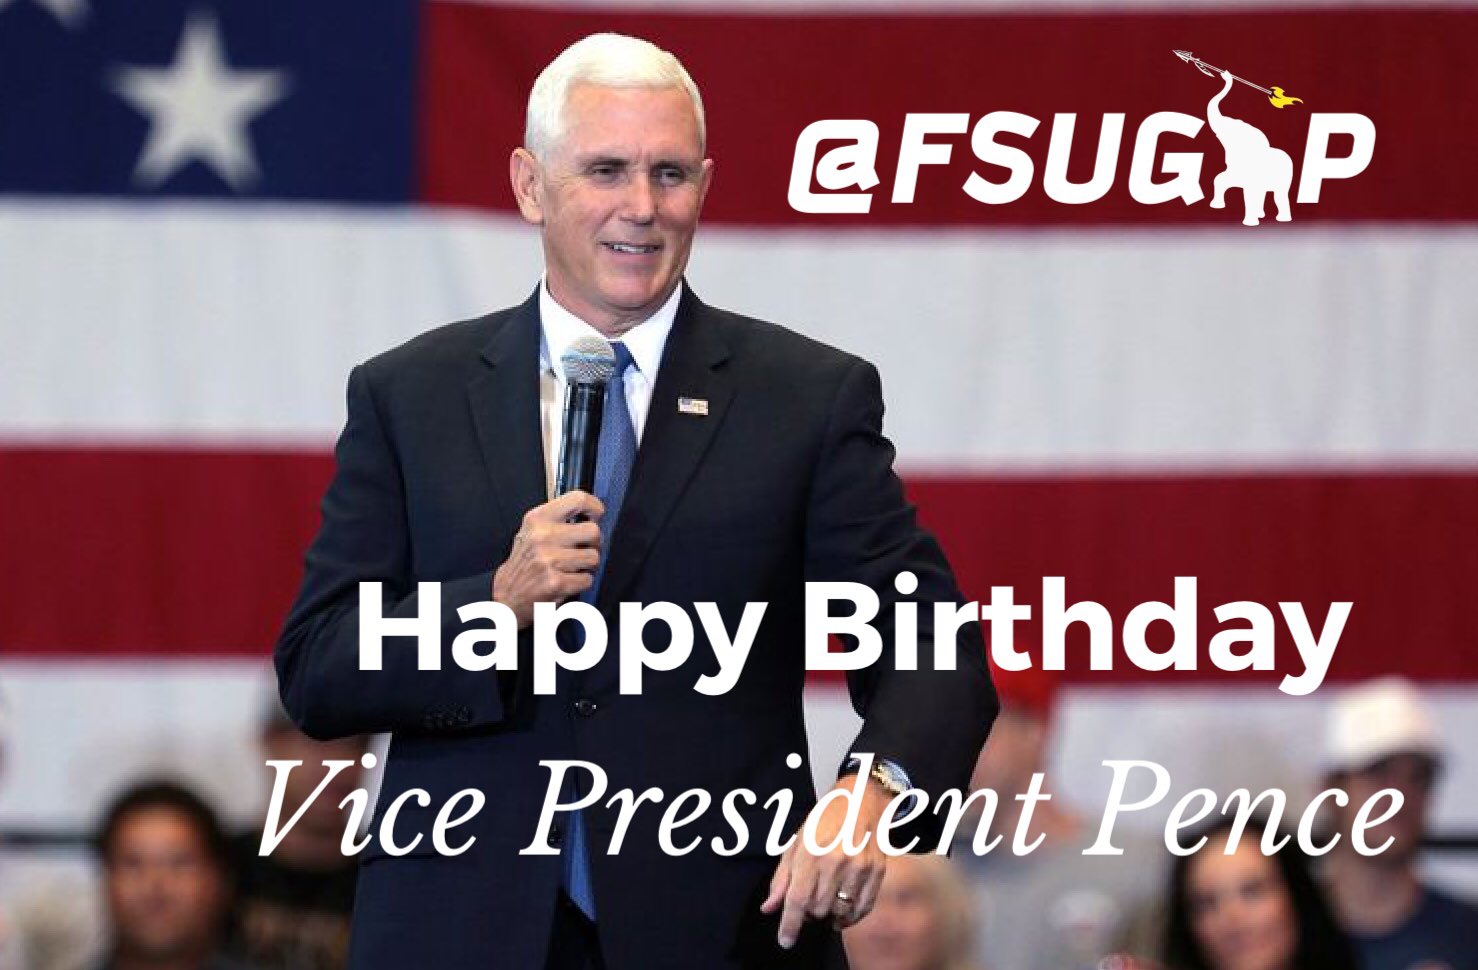 Wishing a happy birthday to our wonderful Mike Pence!! 